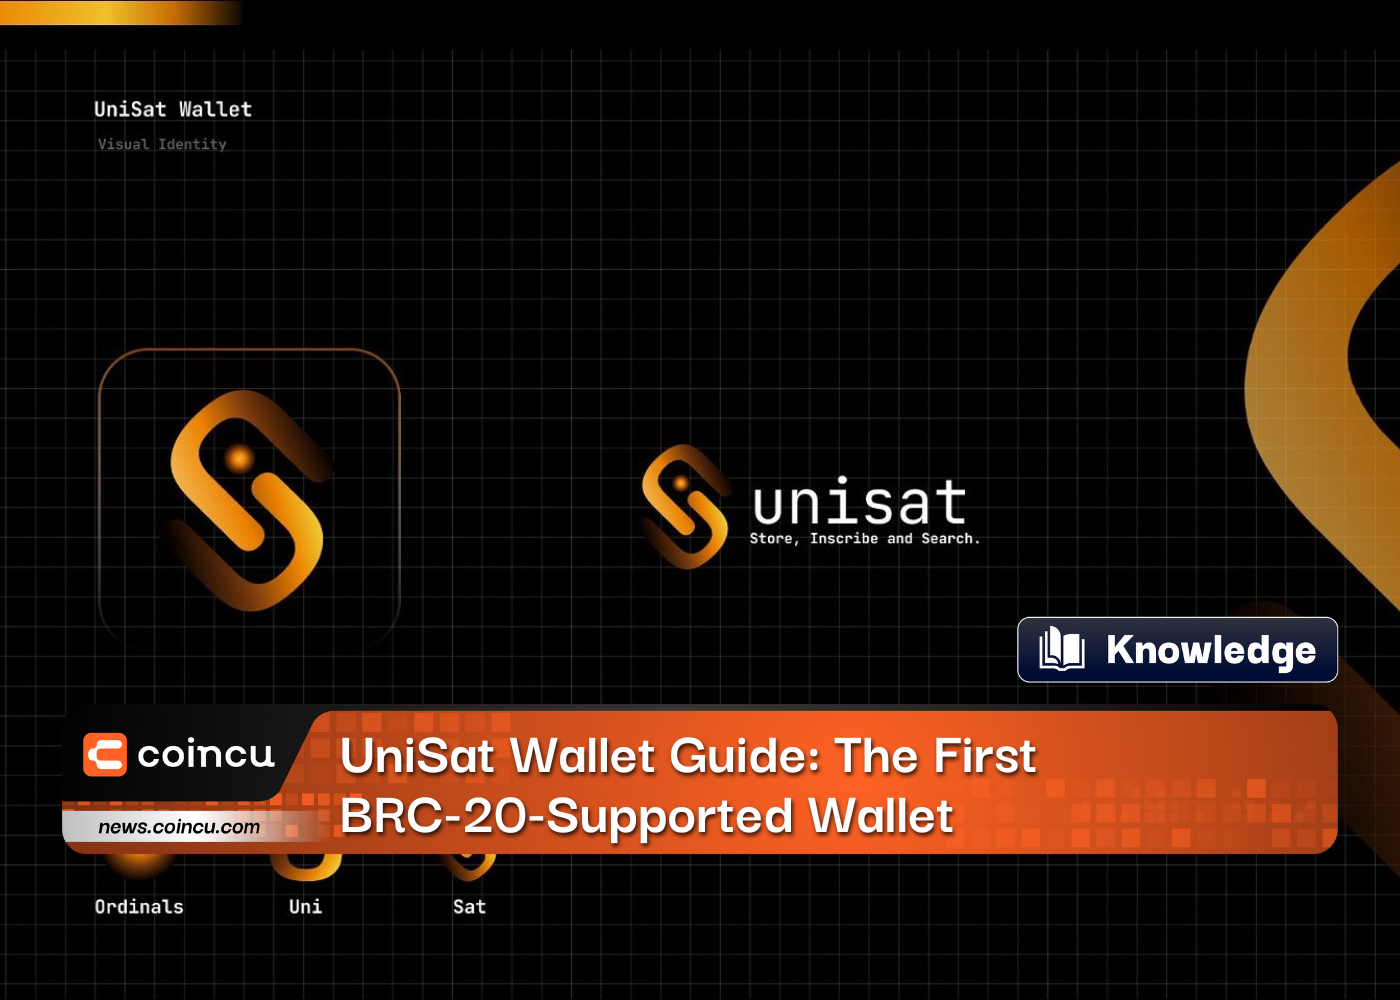 UniSat Wallet Guide: The First BRC-20-Supported Wallet